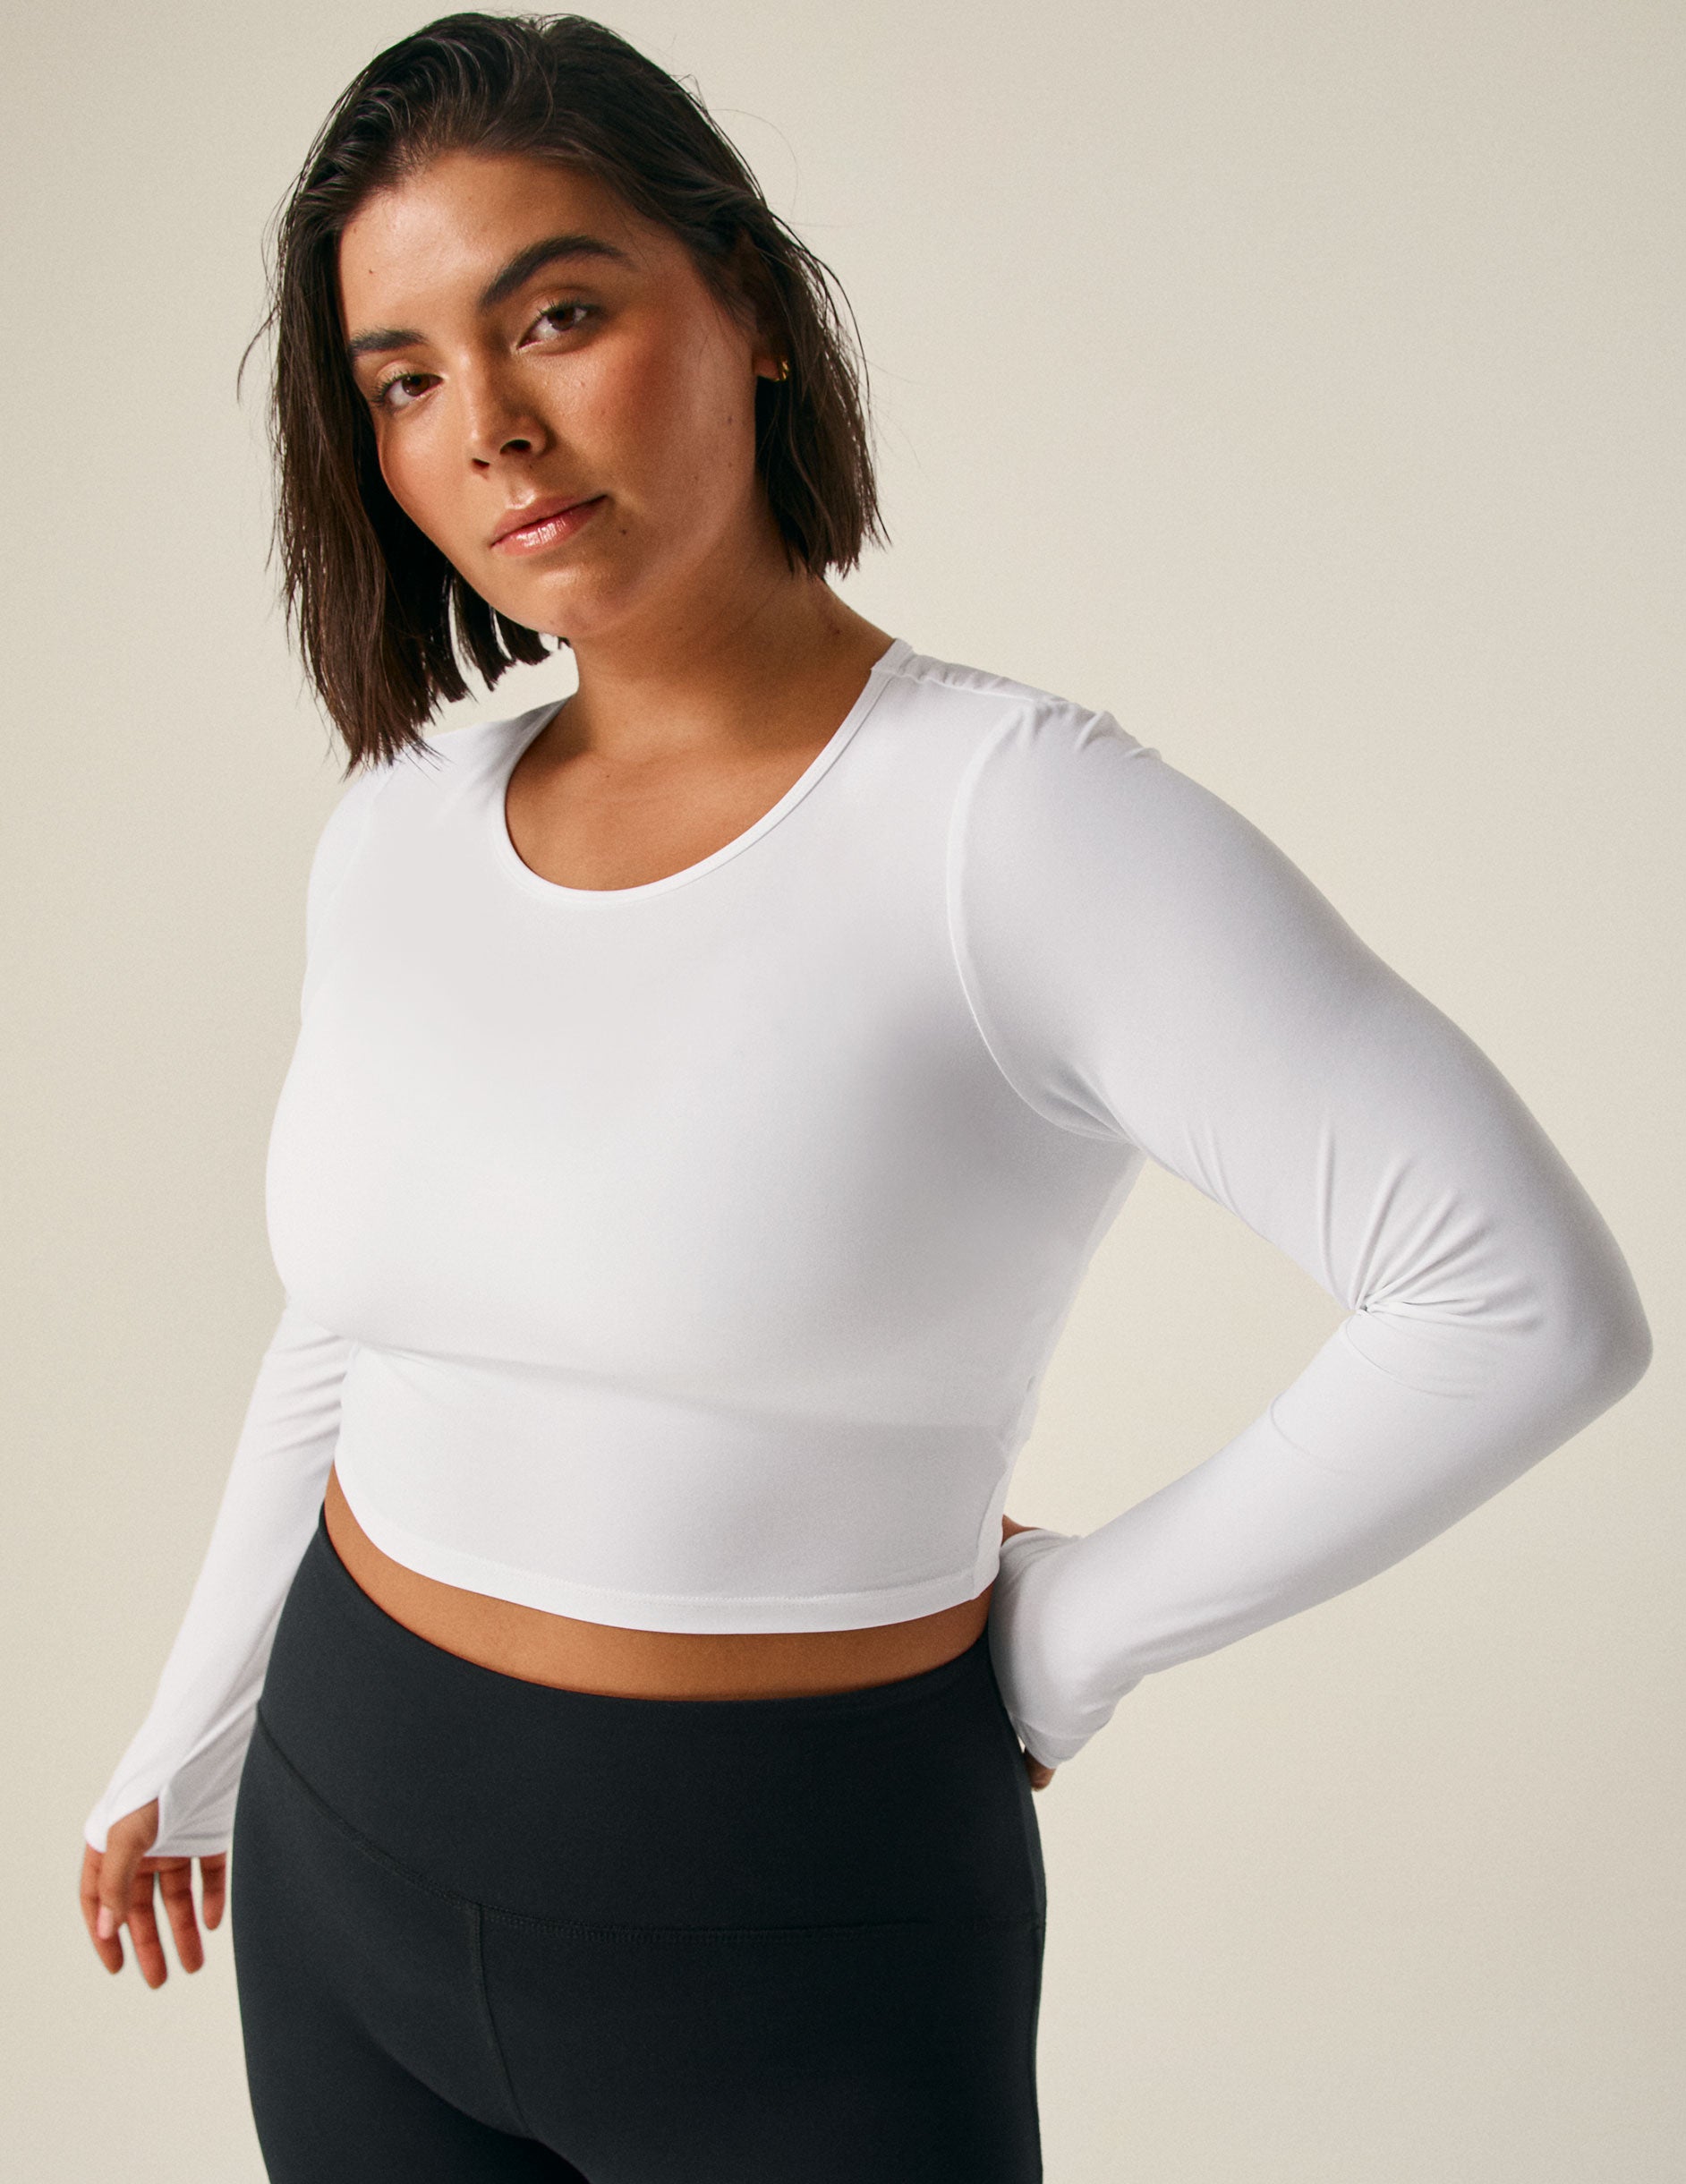 white long sleeve cropped top with an open back detail.